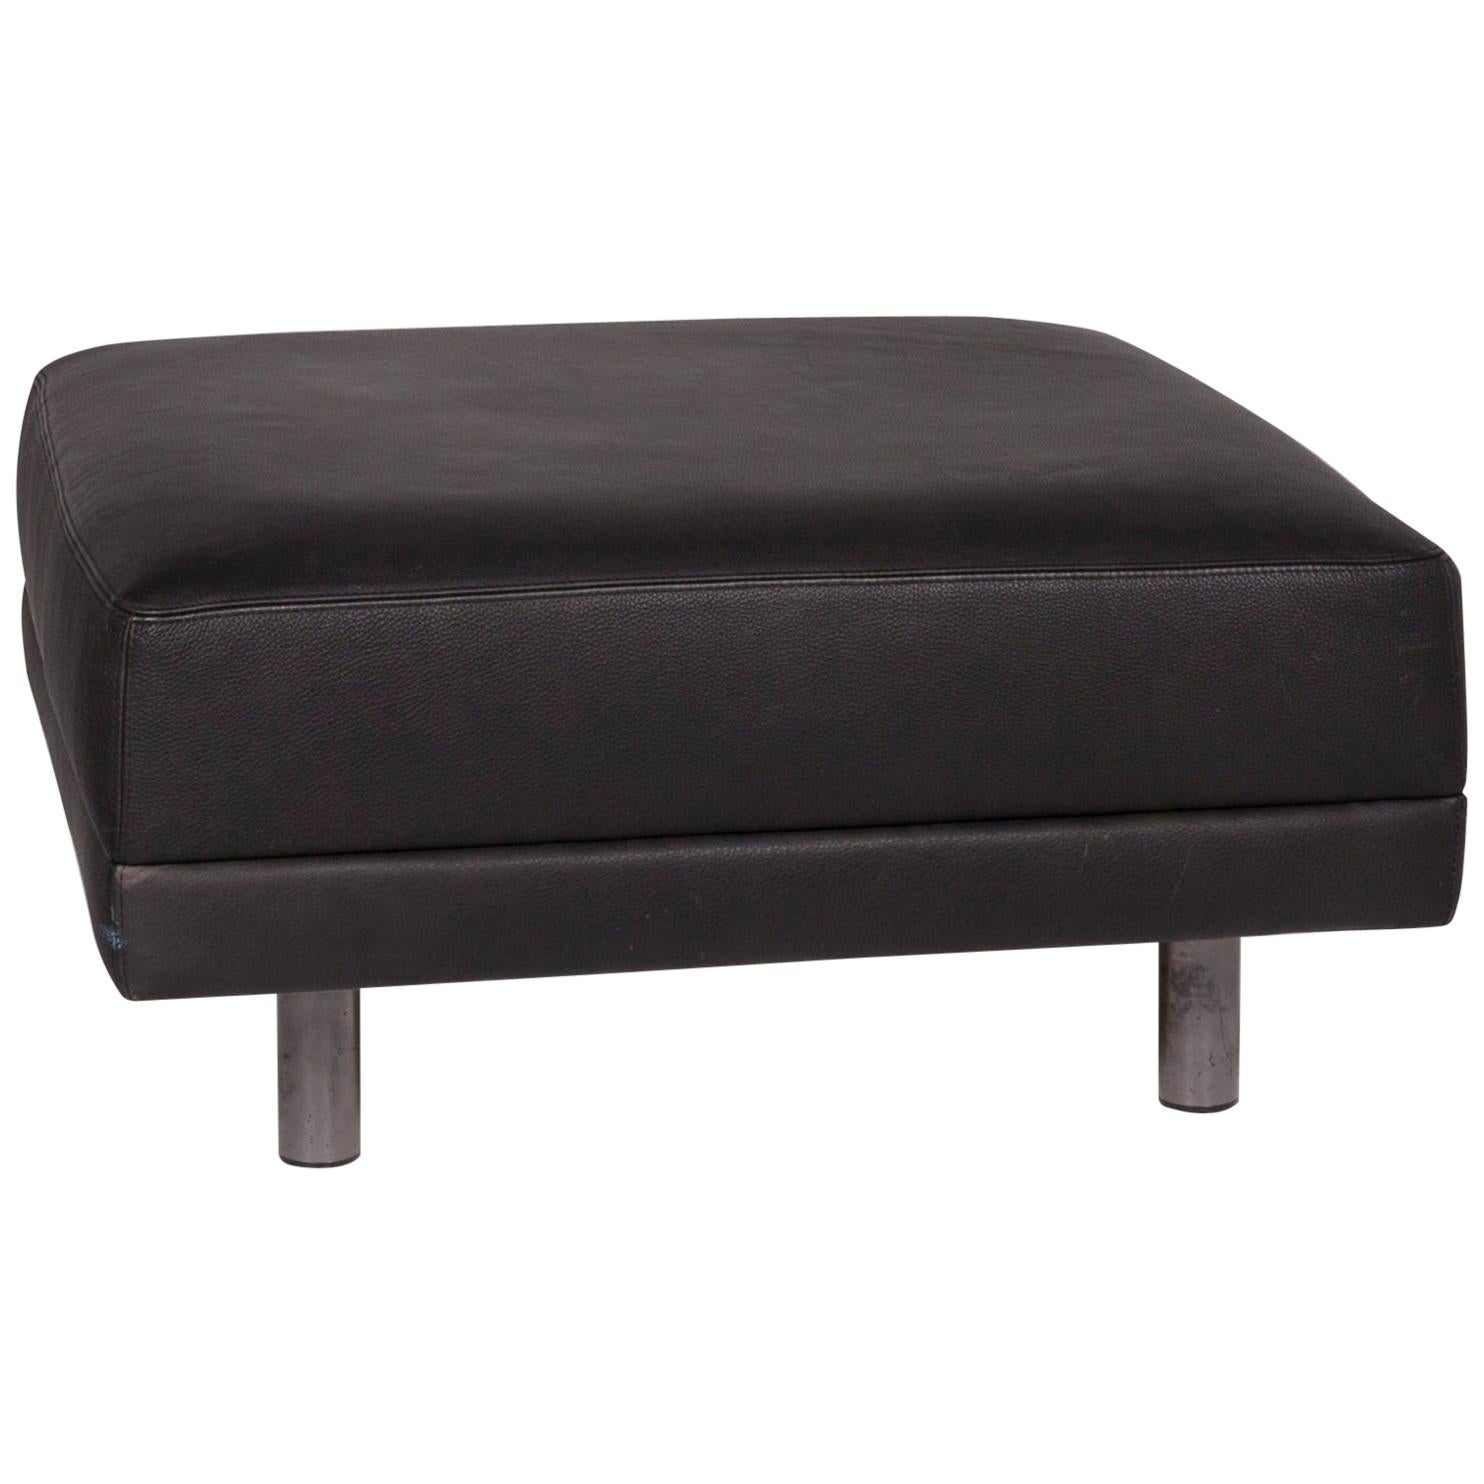 Brühl & Sippold Leather Stool Black For Sale